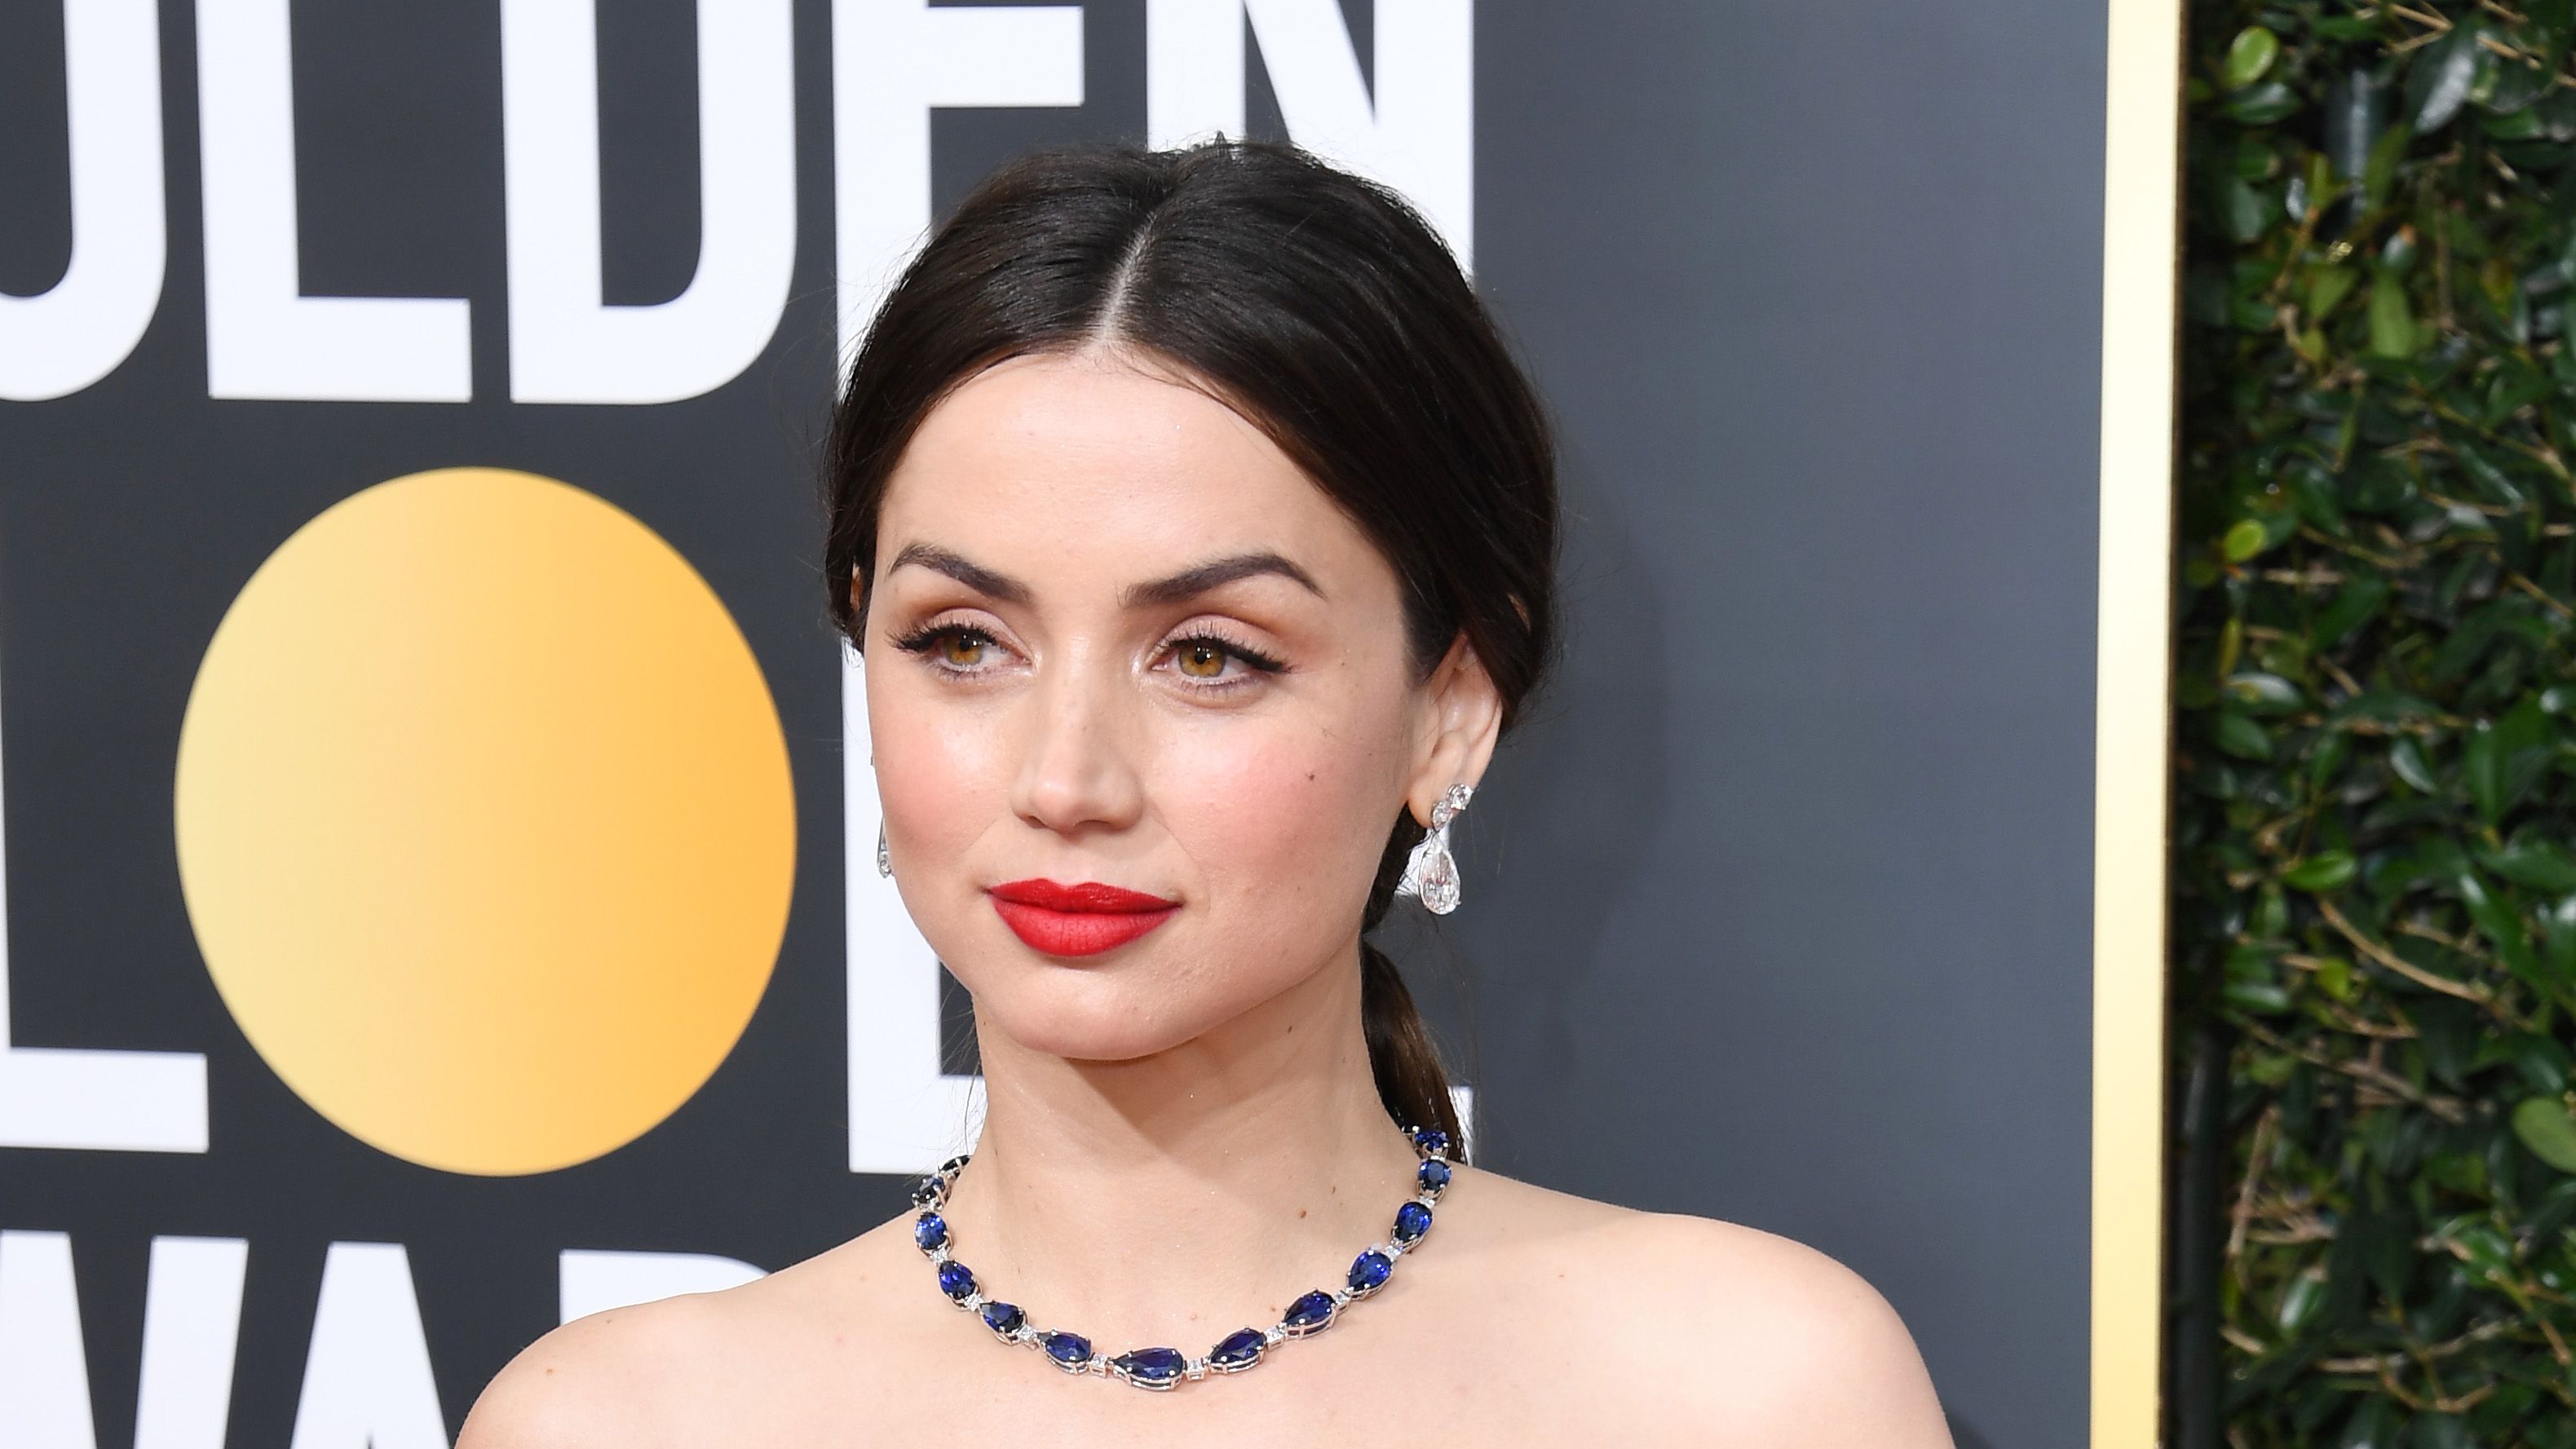 Knives Out' actress Ana de Armas is nominated for a Golden Globe